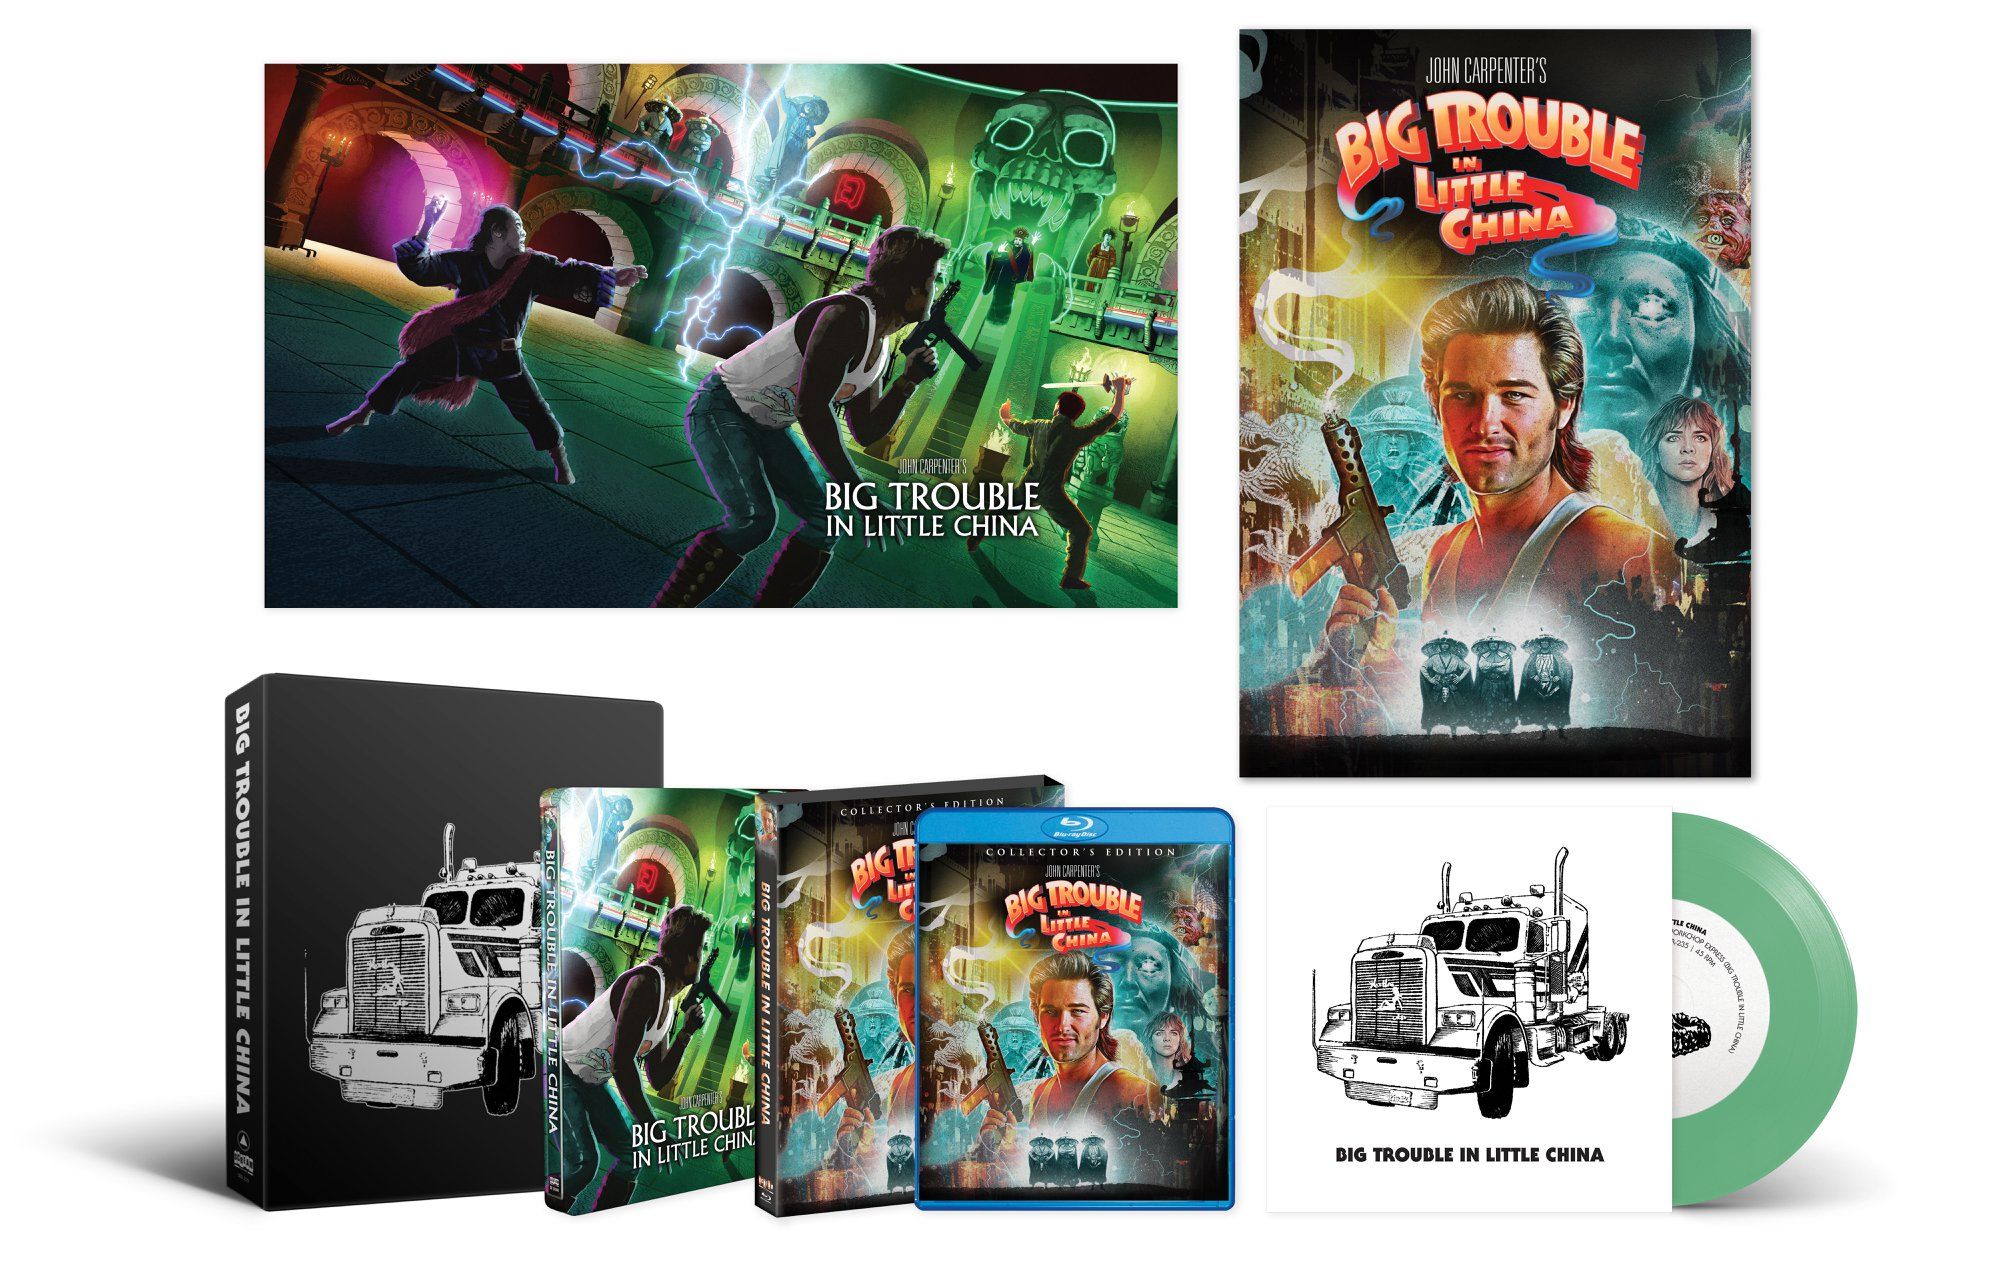 Big Trouble in Little China Collector's Edition Box Set Shout! Factory